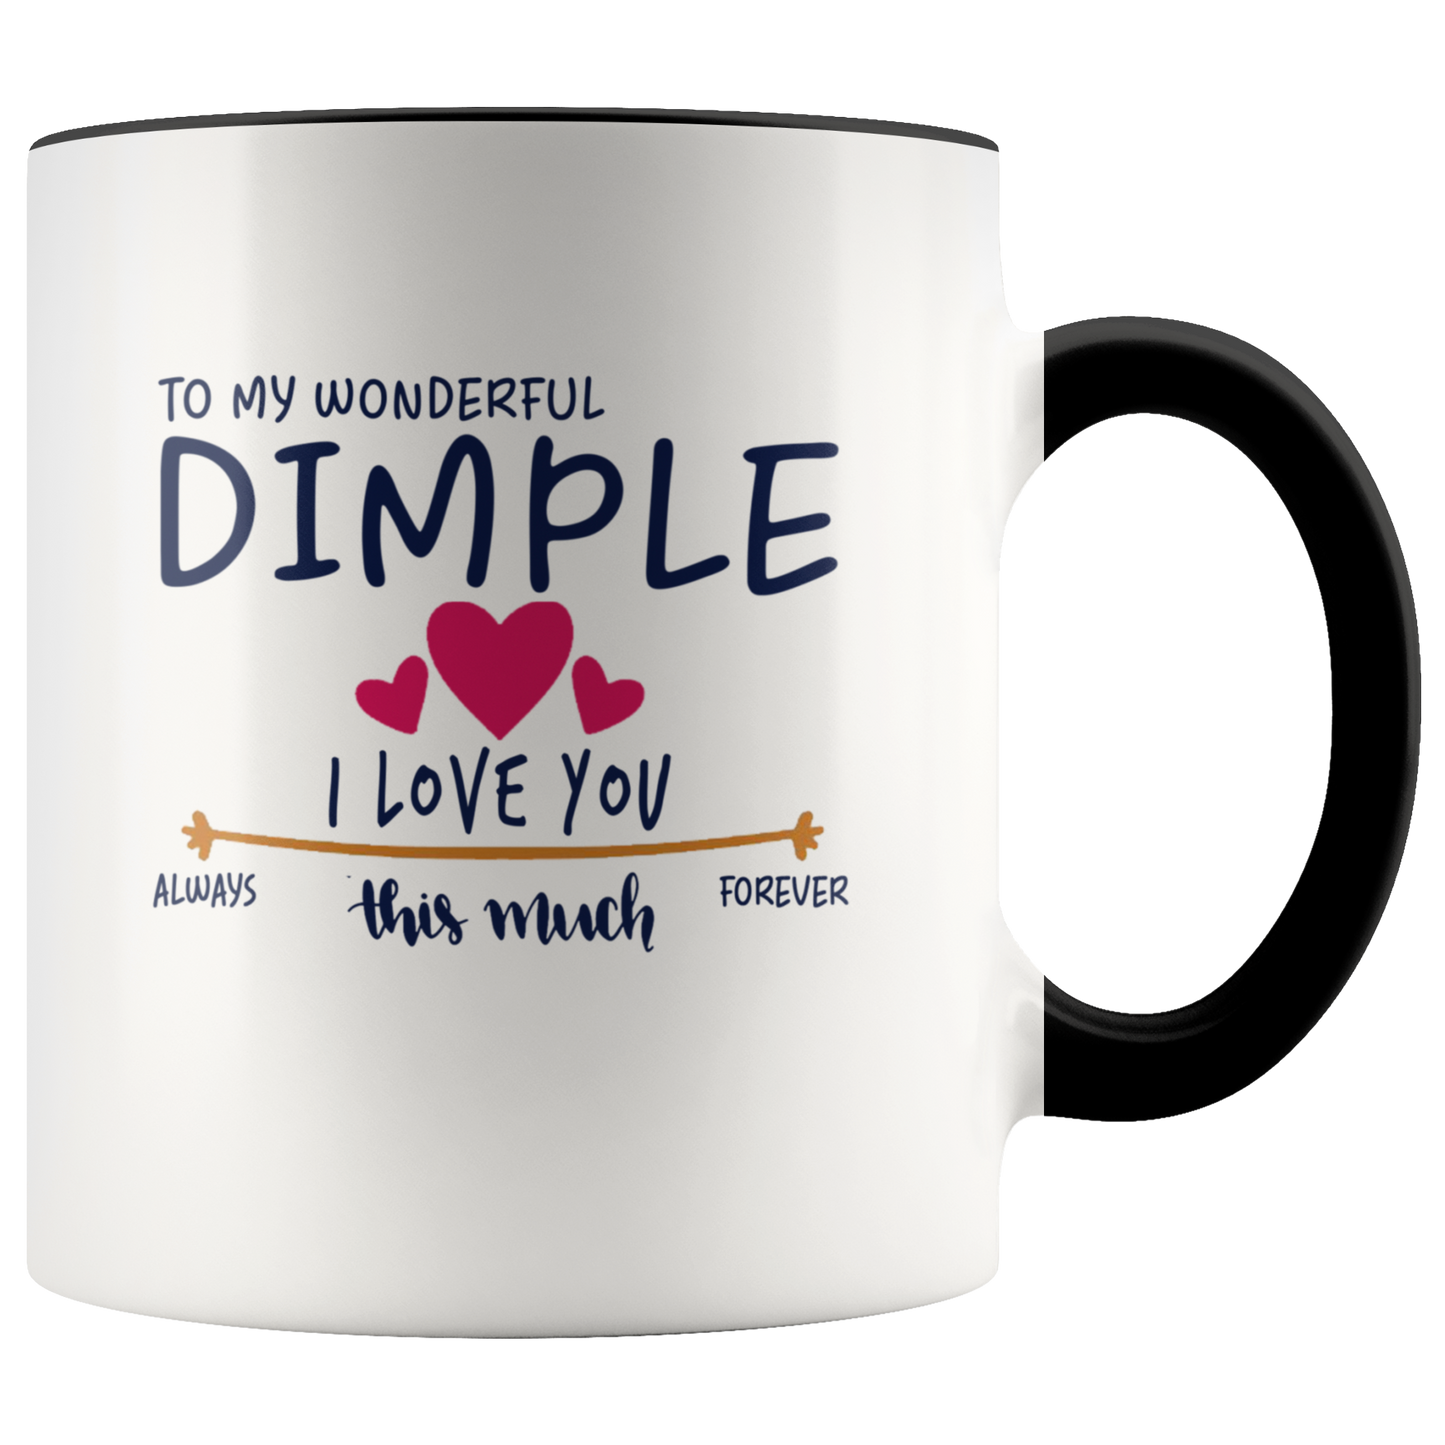 M-21260451-sp-23306 - Valentines Day Coffee Mug With Name Dimple - To My Wonderful